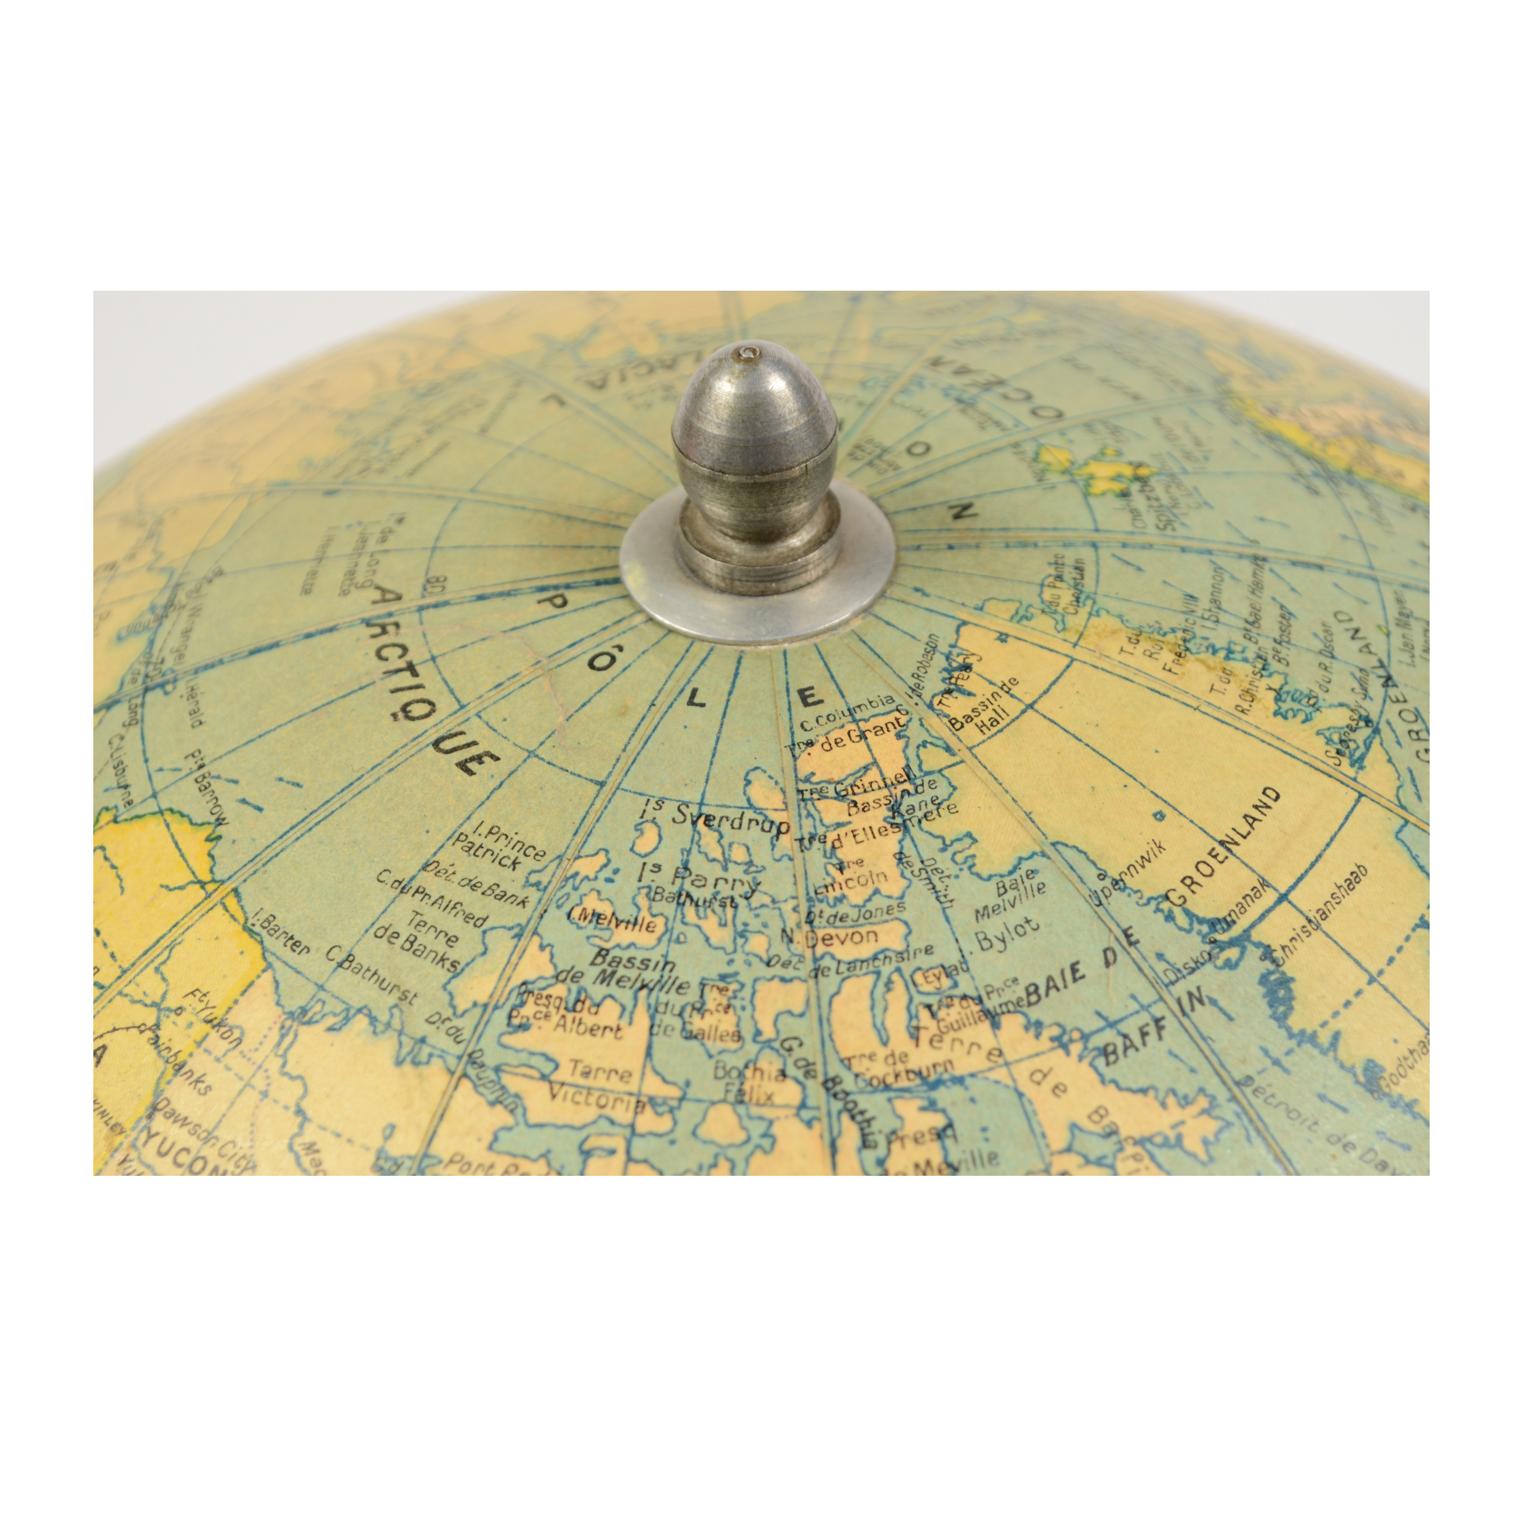 Antique Terrestrial Globe Published in 1940s by Girard Barrère et Thomas, Paris For Sale 6